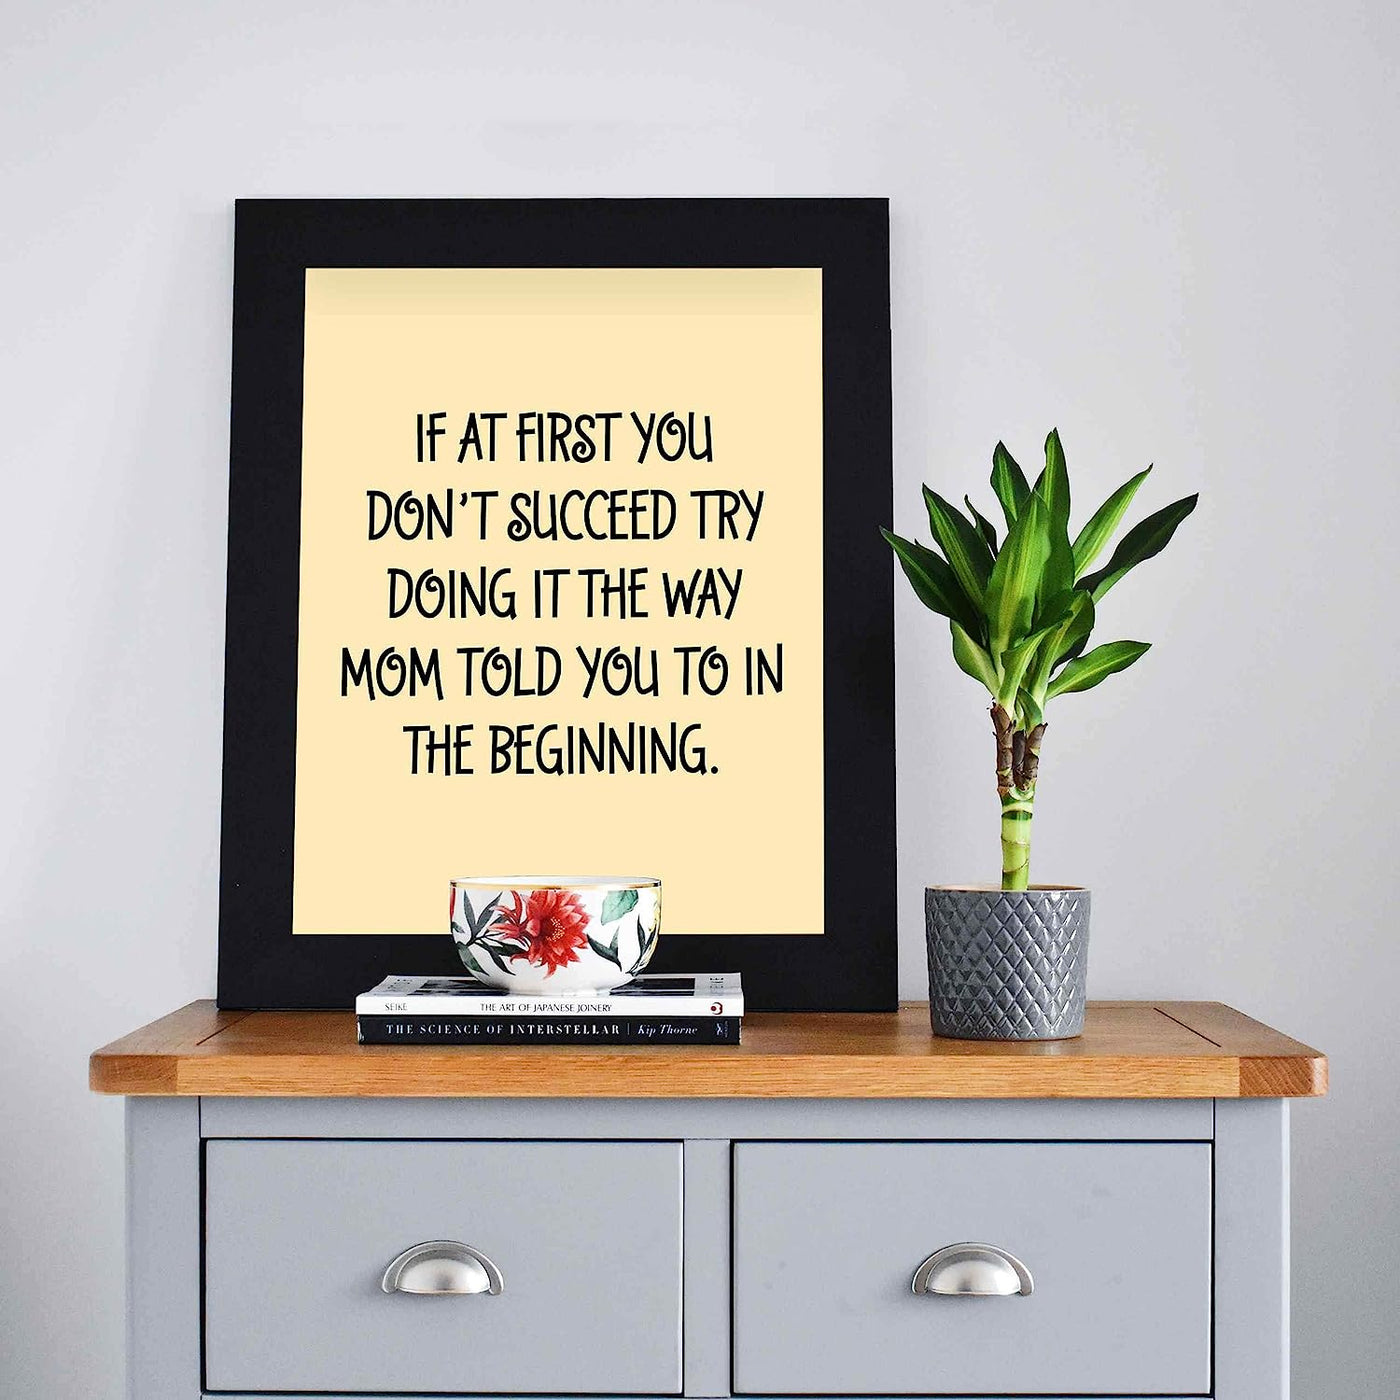 If At First Don't Succeed-Try Doing Way Mom Told You Funny Family Wall Sign -8 x 10" Typographic Art Print-Ready to Frame. Humorous Home-Bar-Shop-Cave-Novelty Decor. Fun Decoration for All!